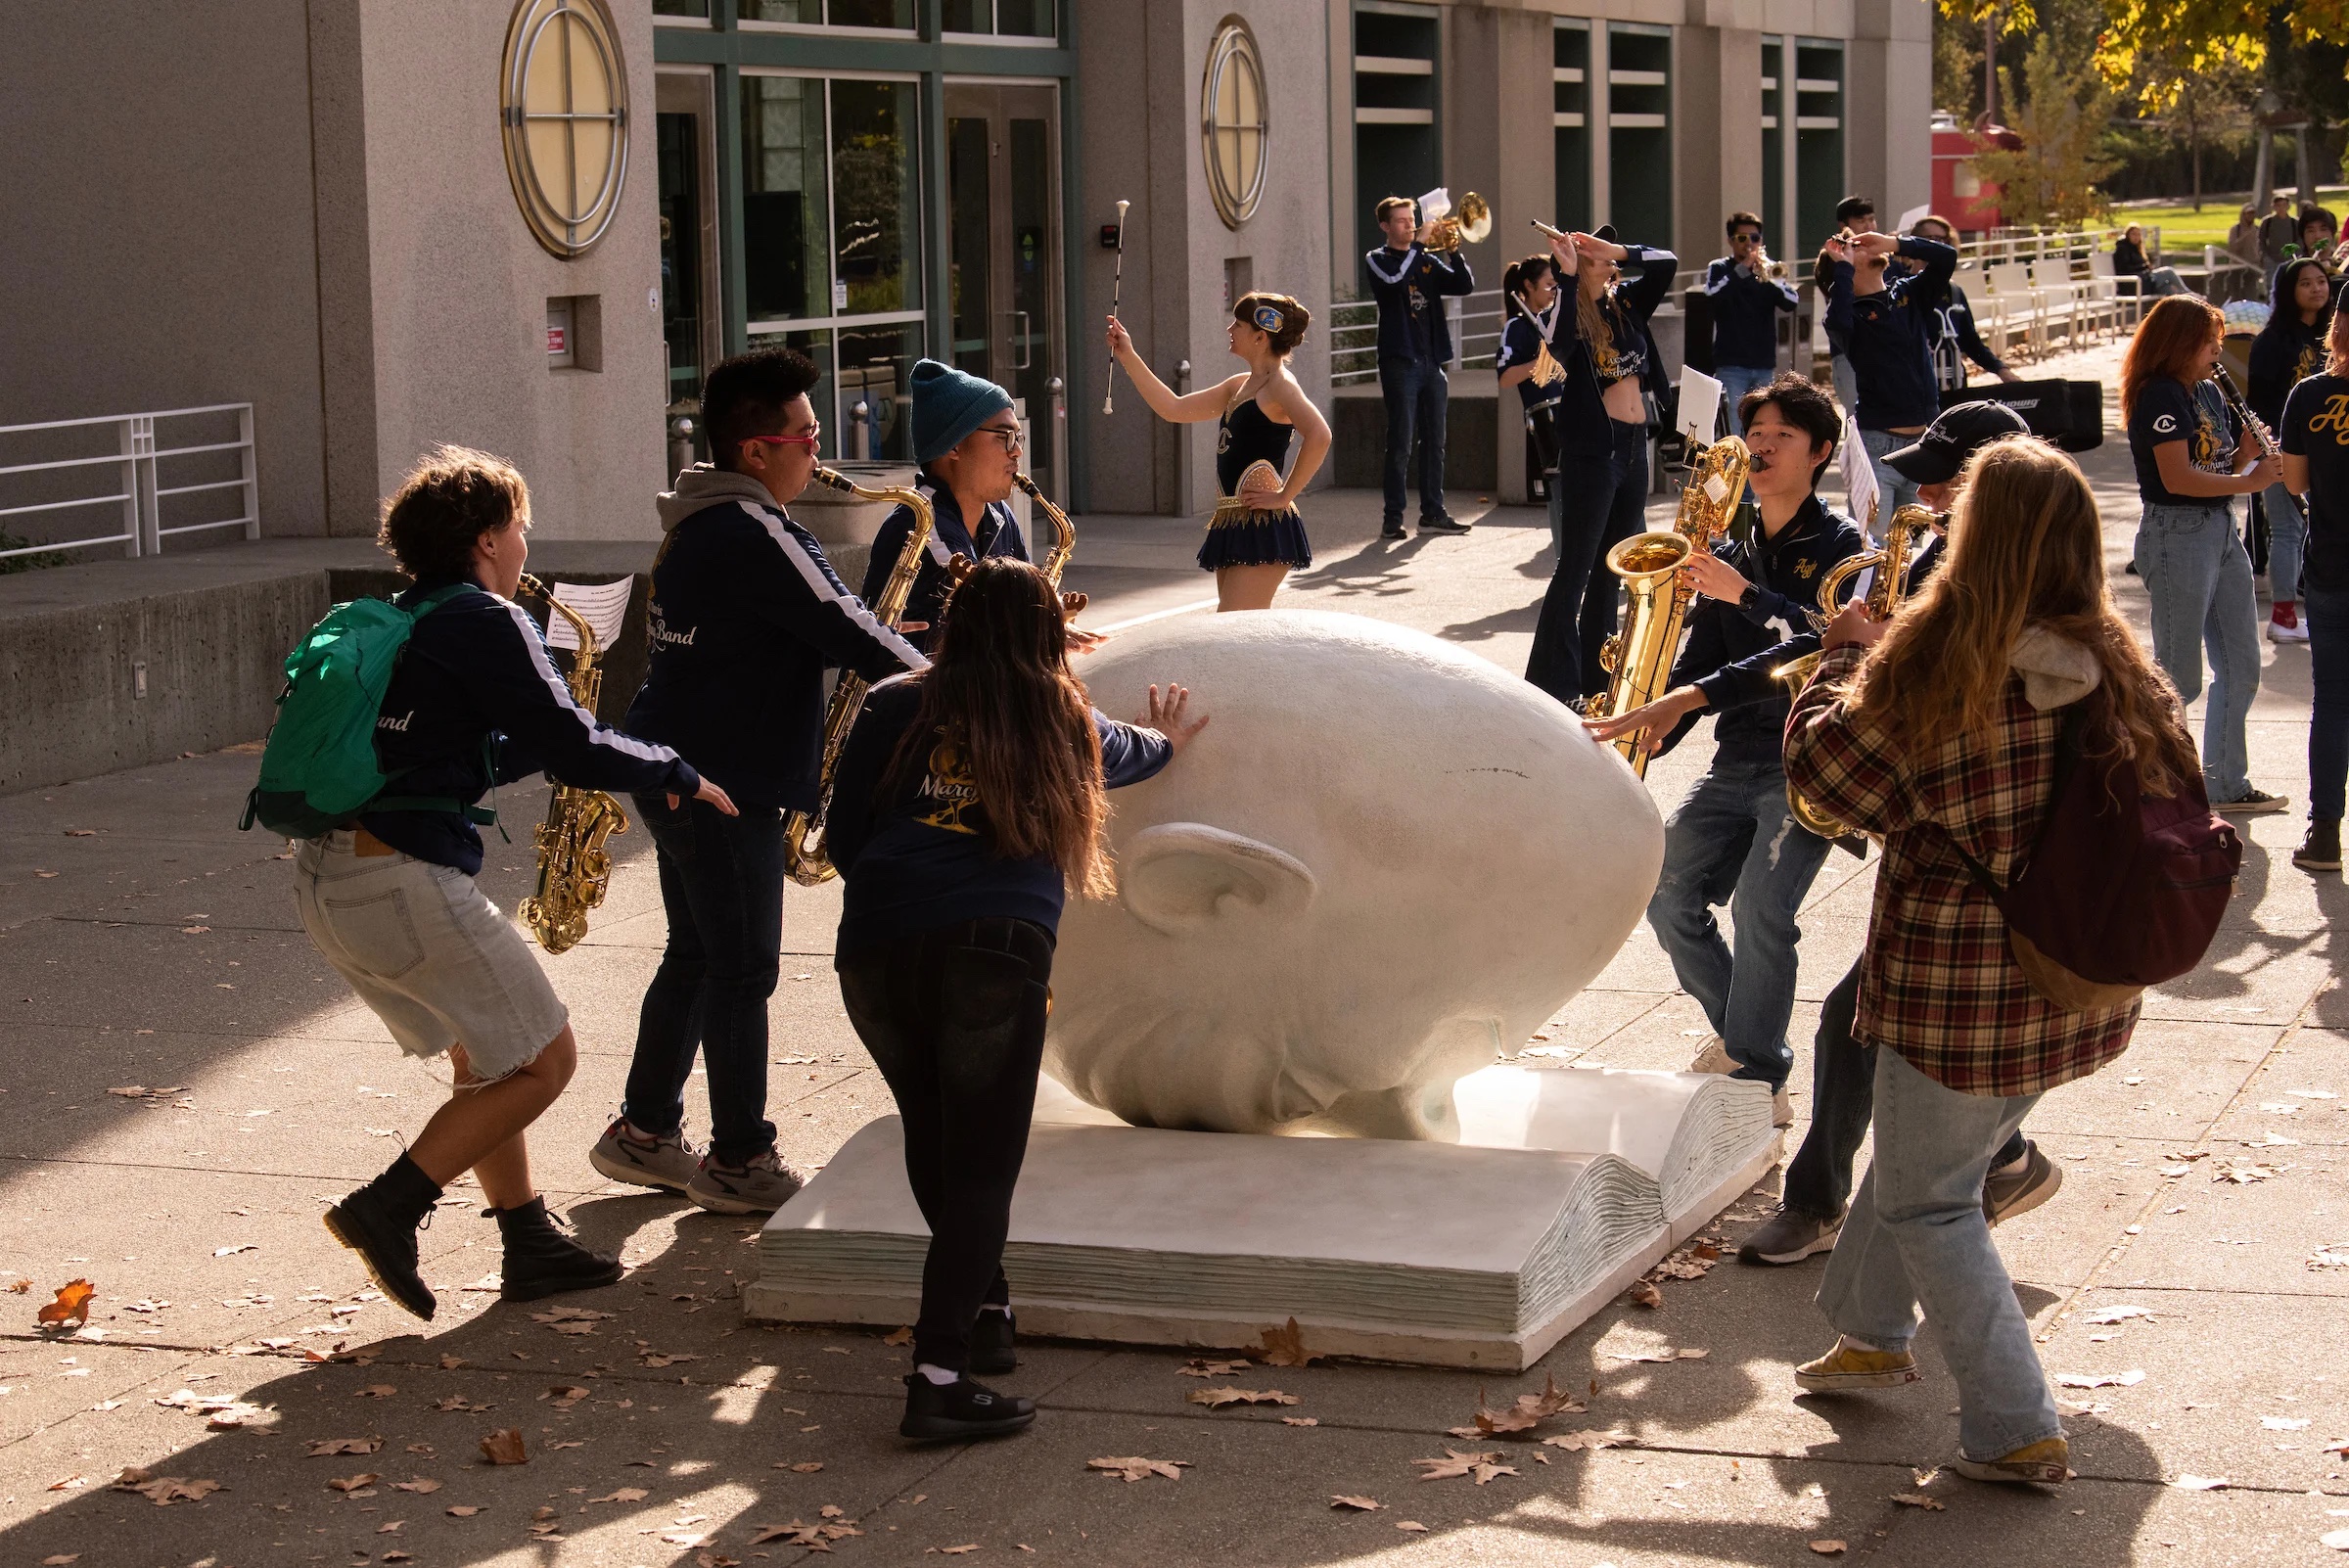 Members of the UC Davis marching band play their instruments and rub the Bookhead, a large sculpture of a head with its nose in a book, for good luck